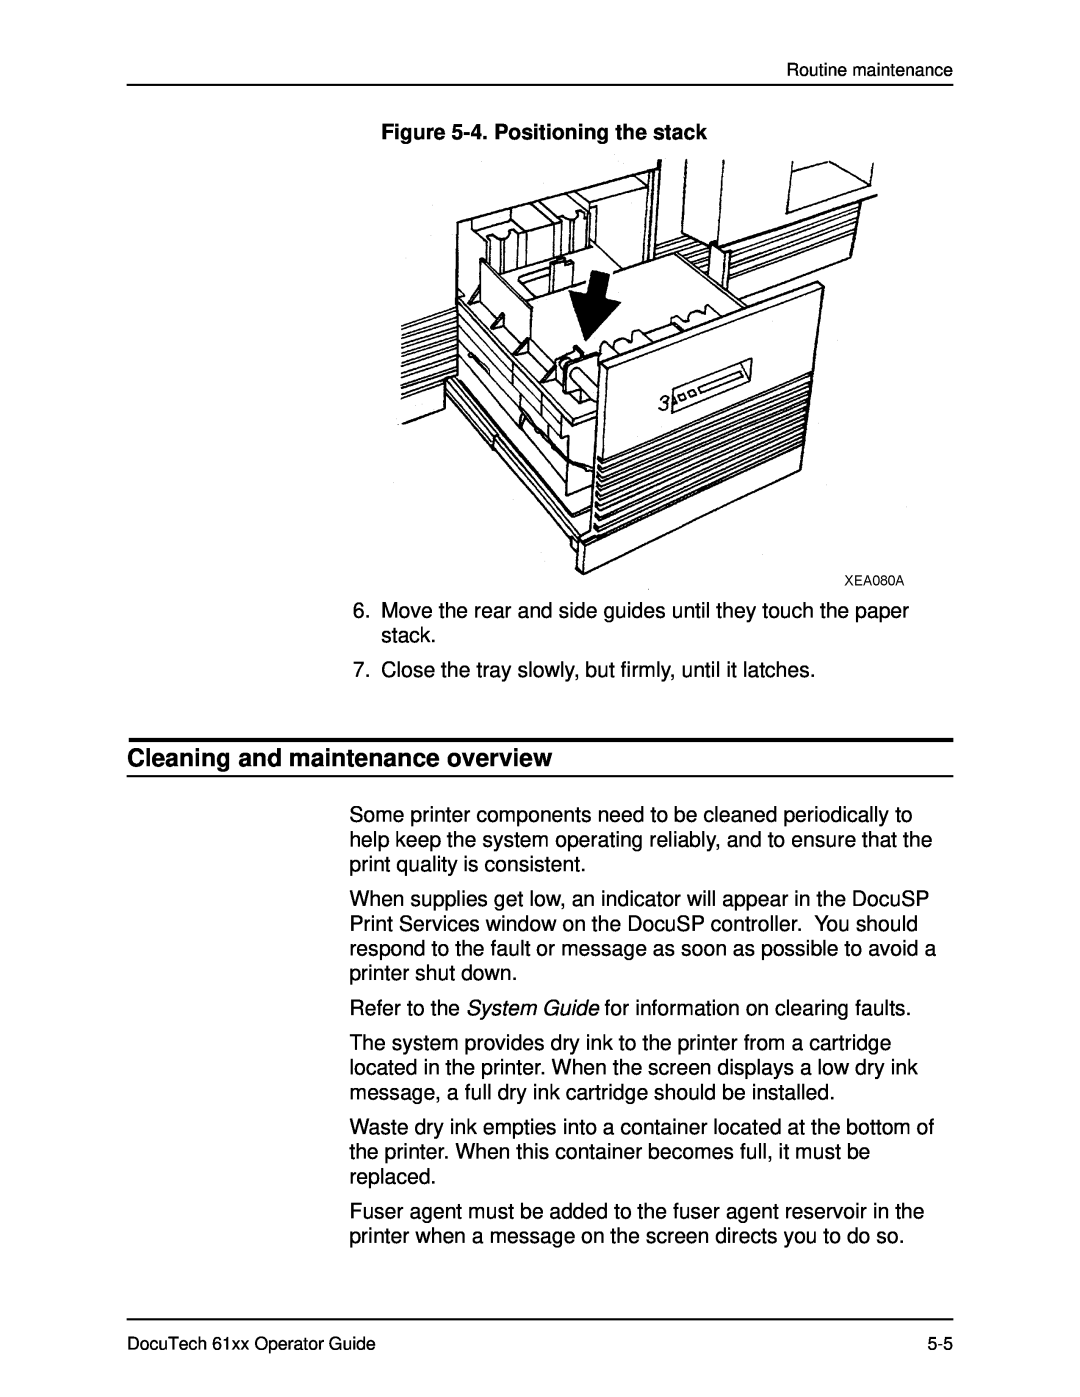 Xerox 61xx manual Cleaning and maintenance overview, 4. Positioning the stack 